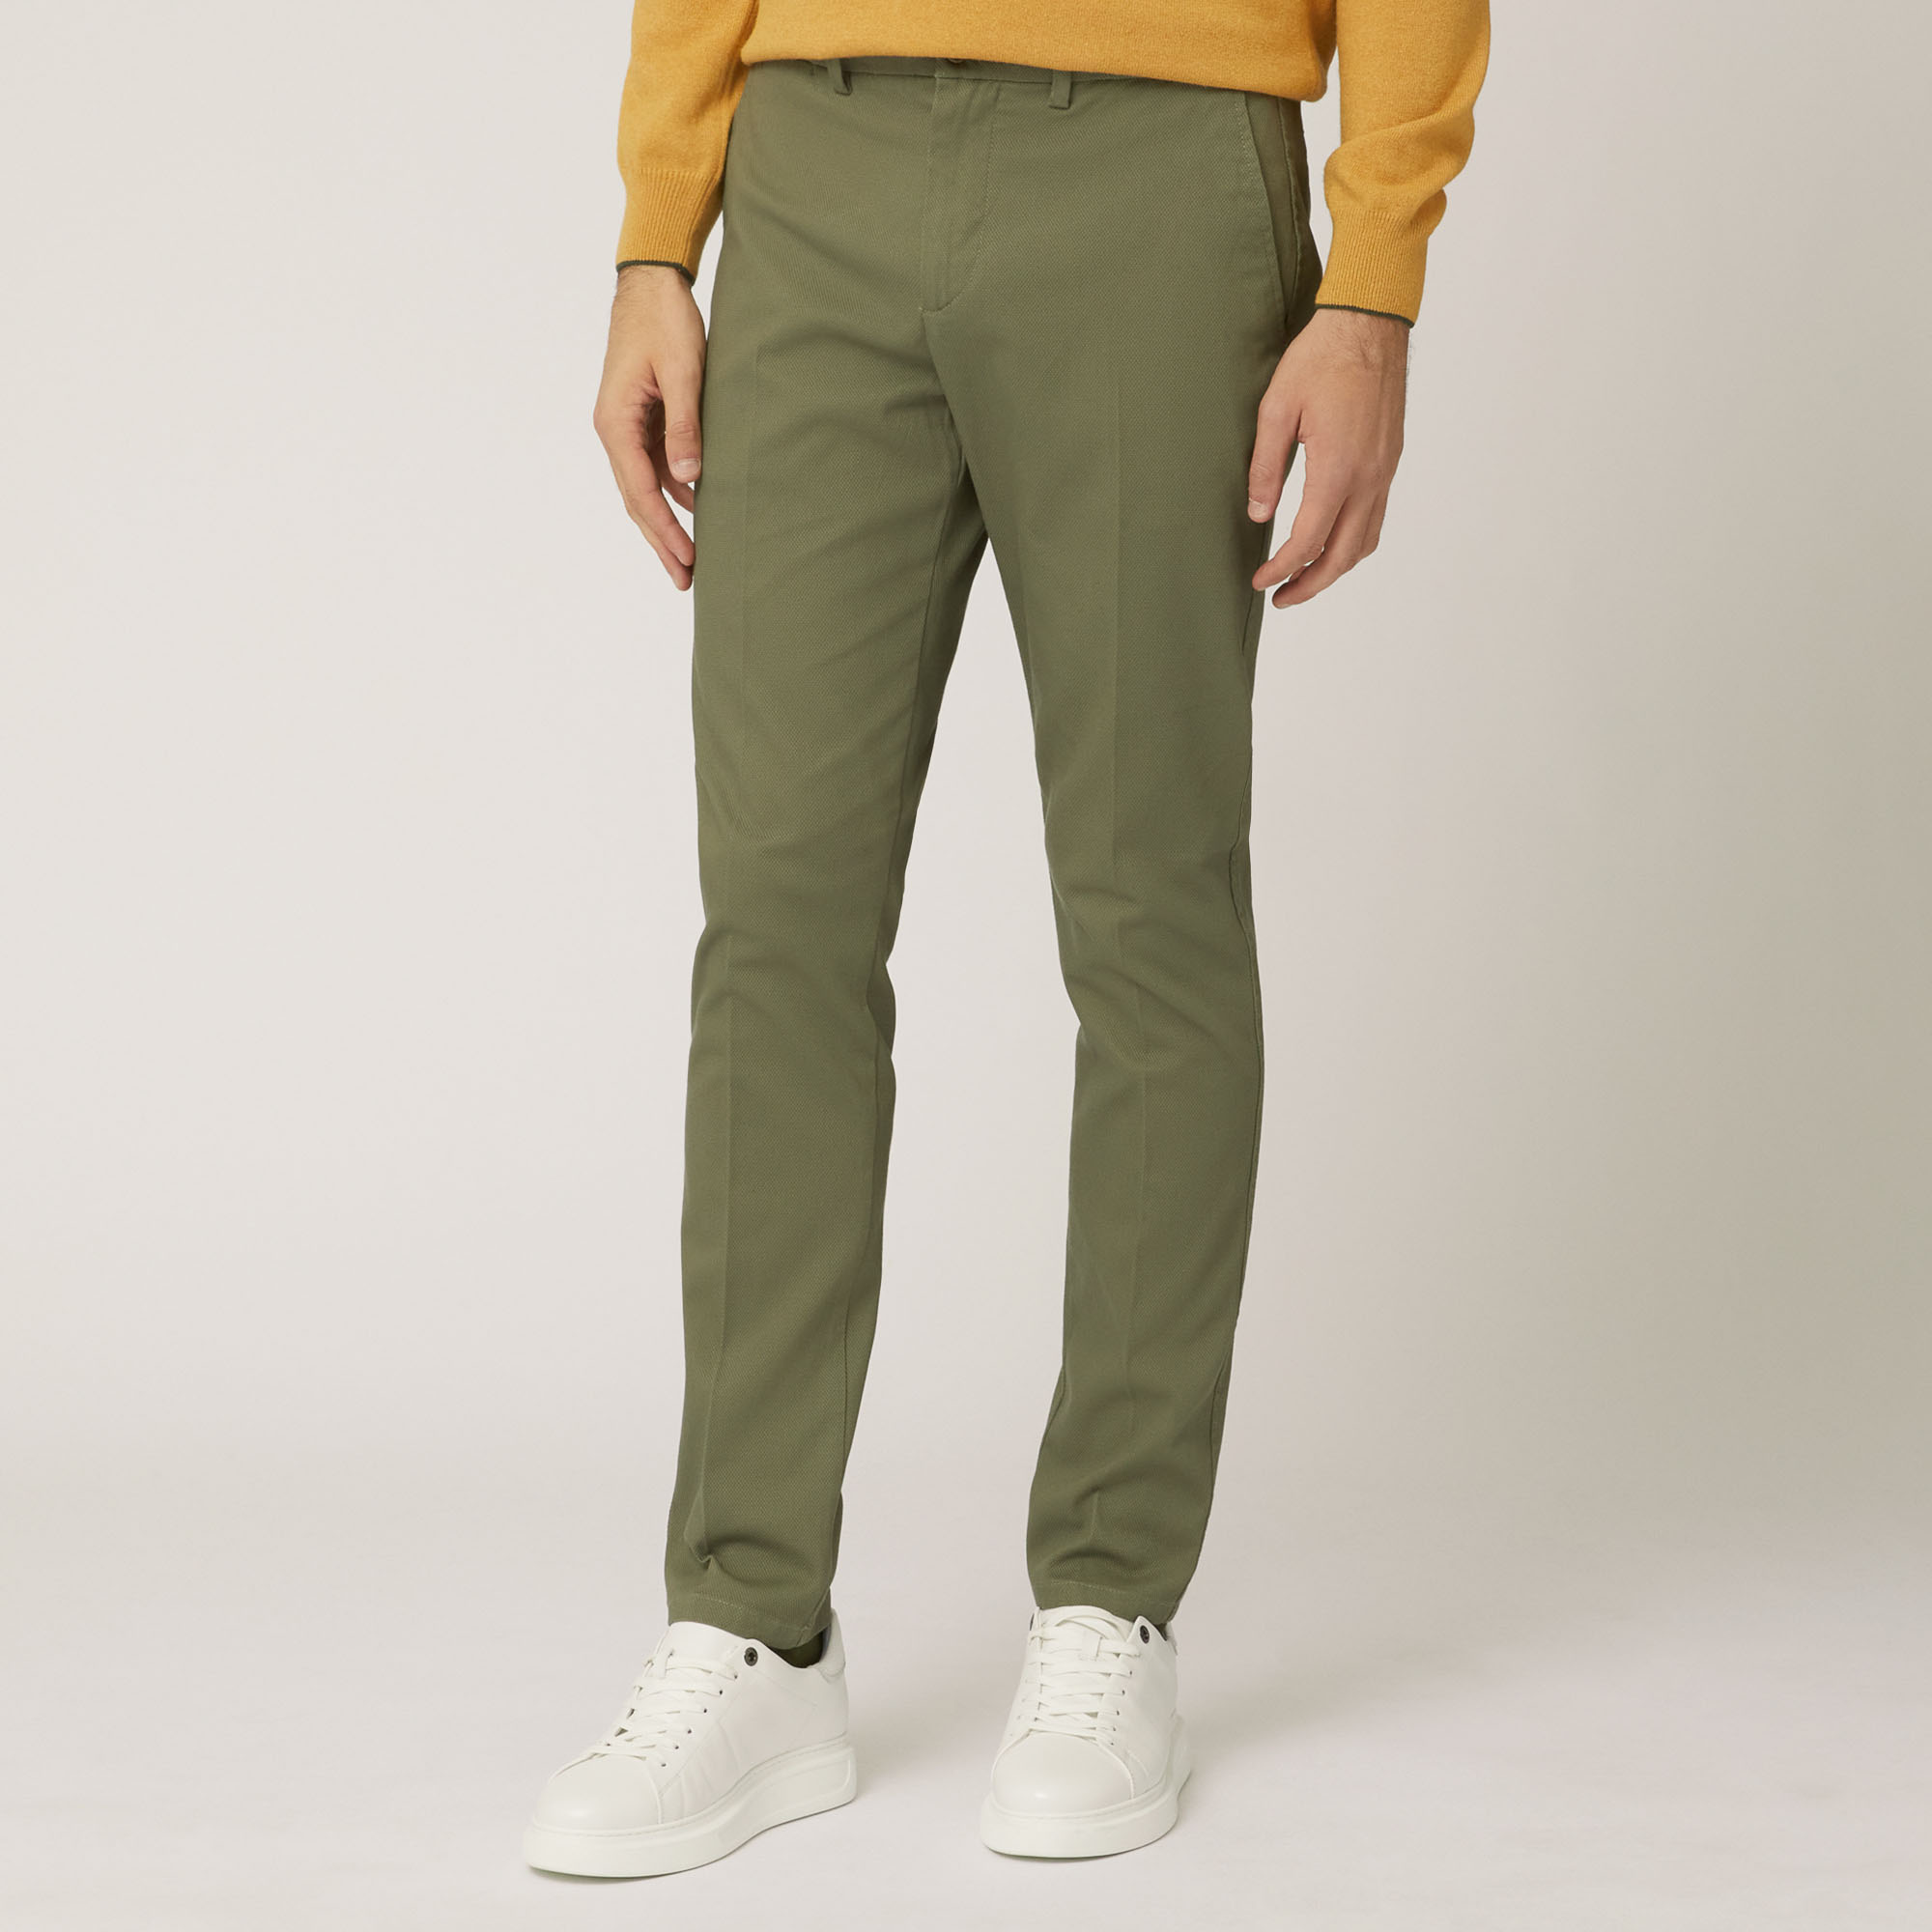 Pantalone Chino Narrow Fit In Cotone Stretch, Verde Oliva, large